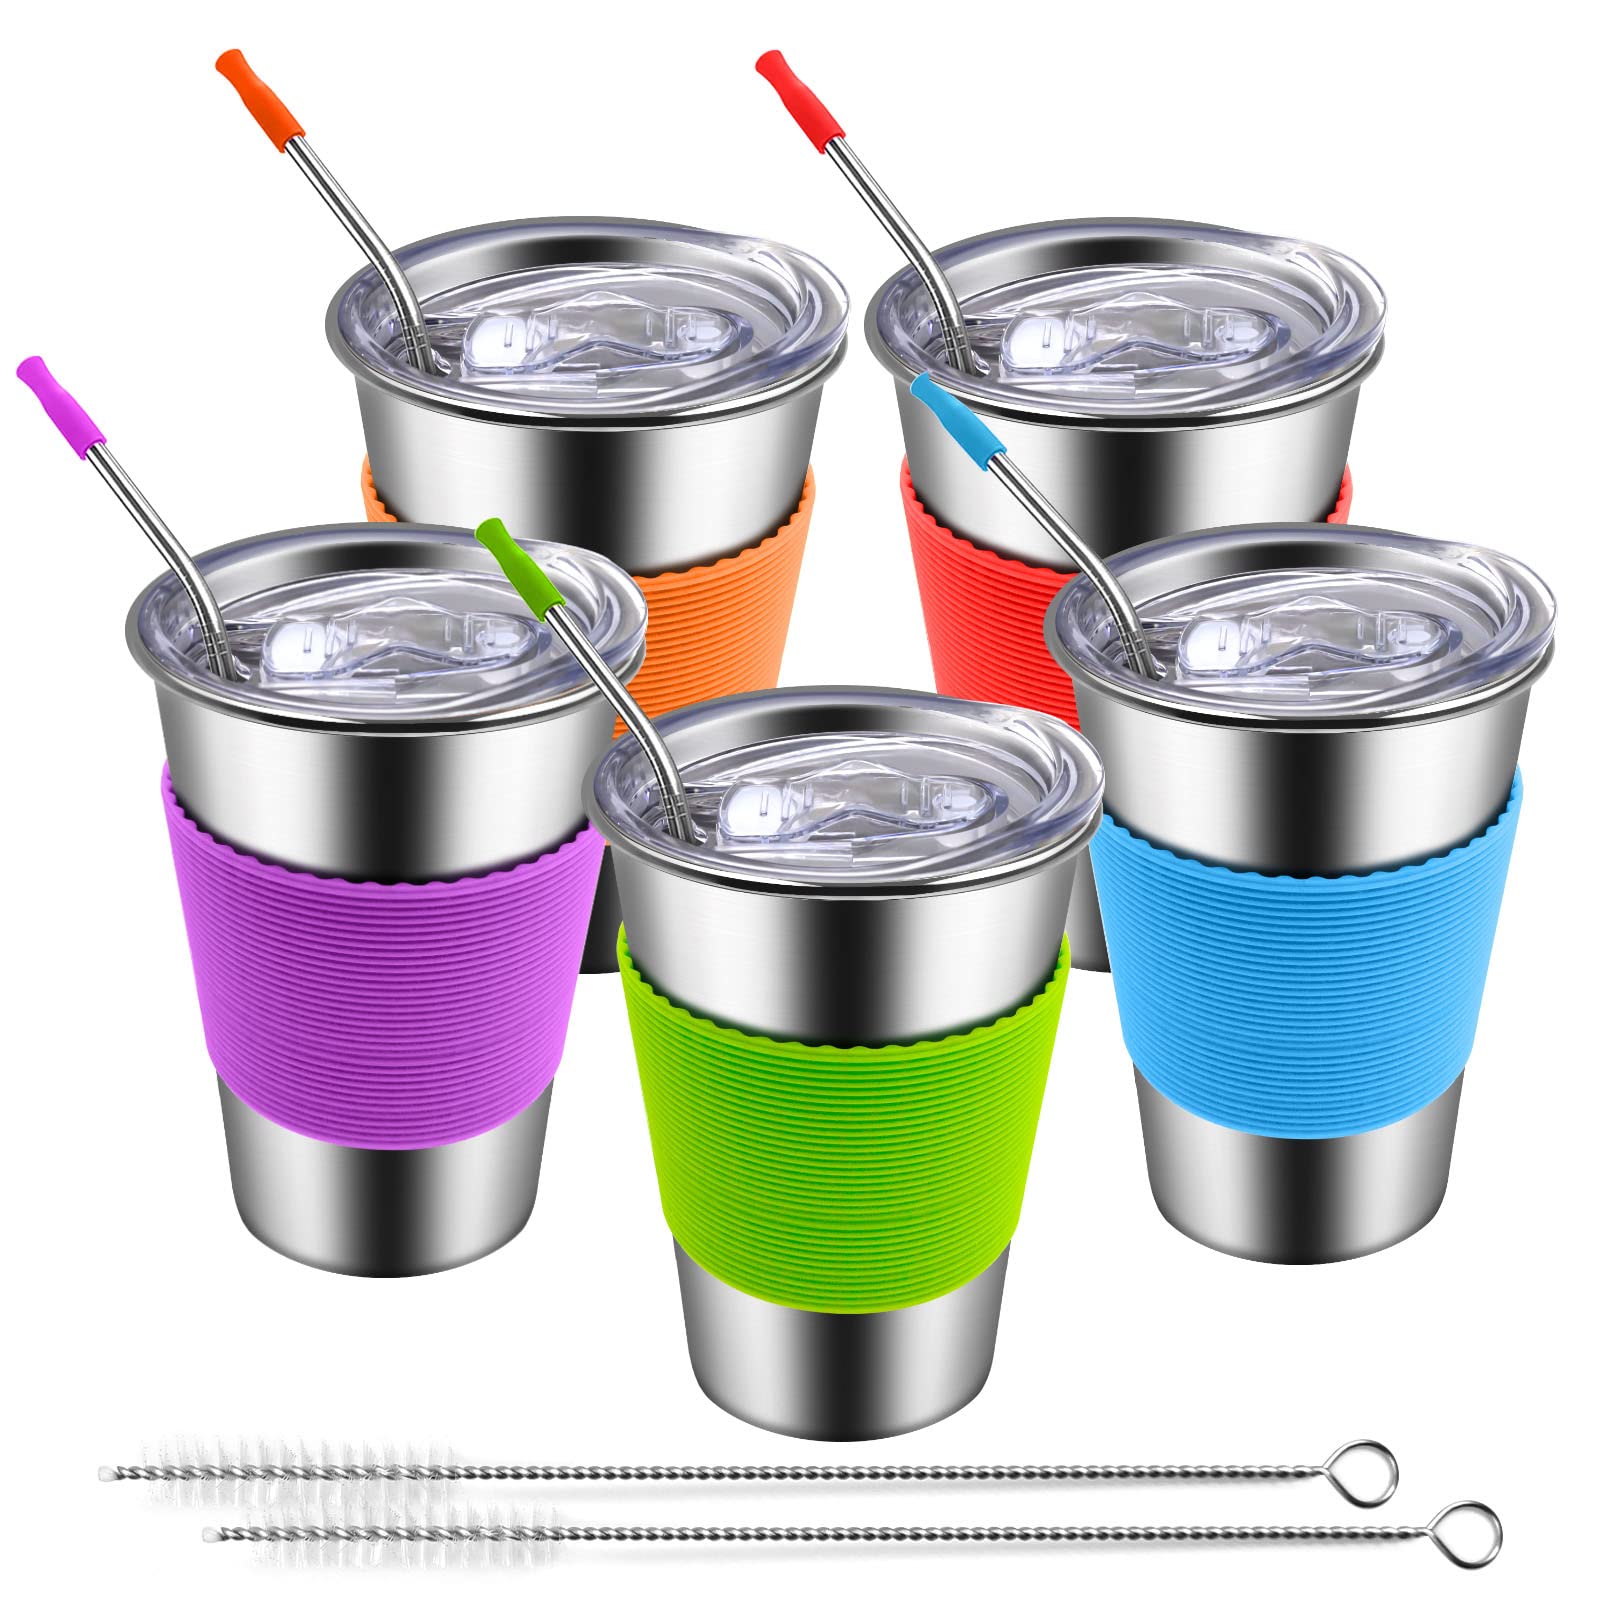 Casewin 7 Pack 12oz Plastic Kids Cups with Lids & Straws